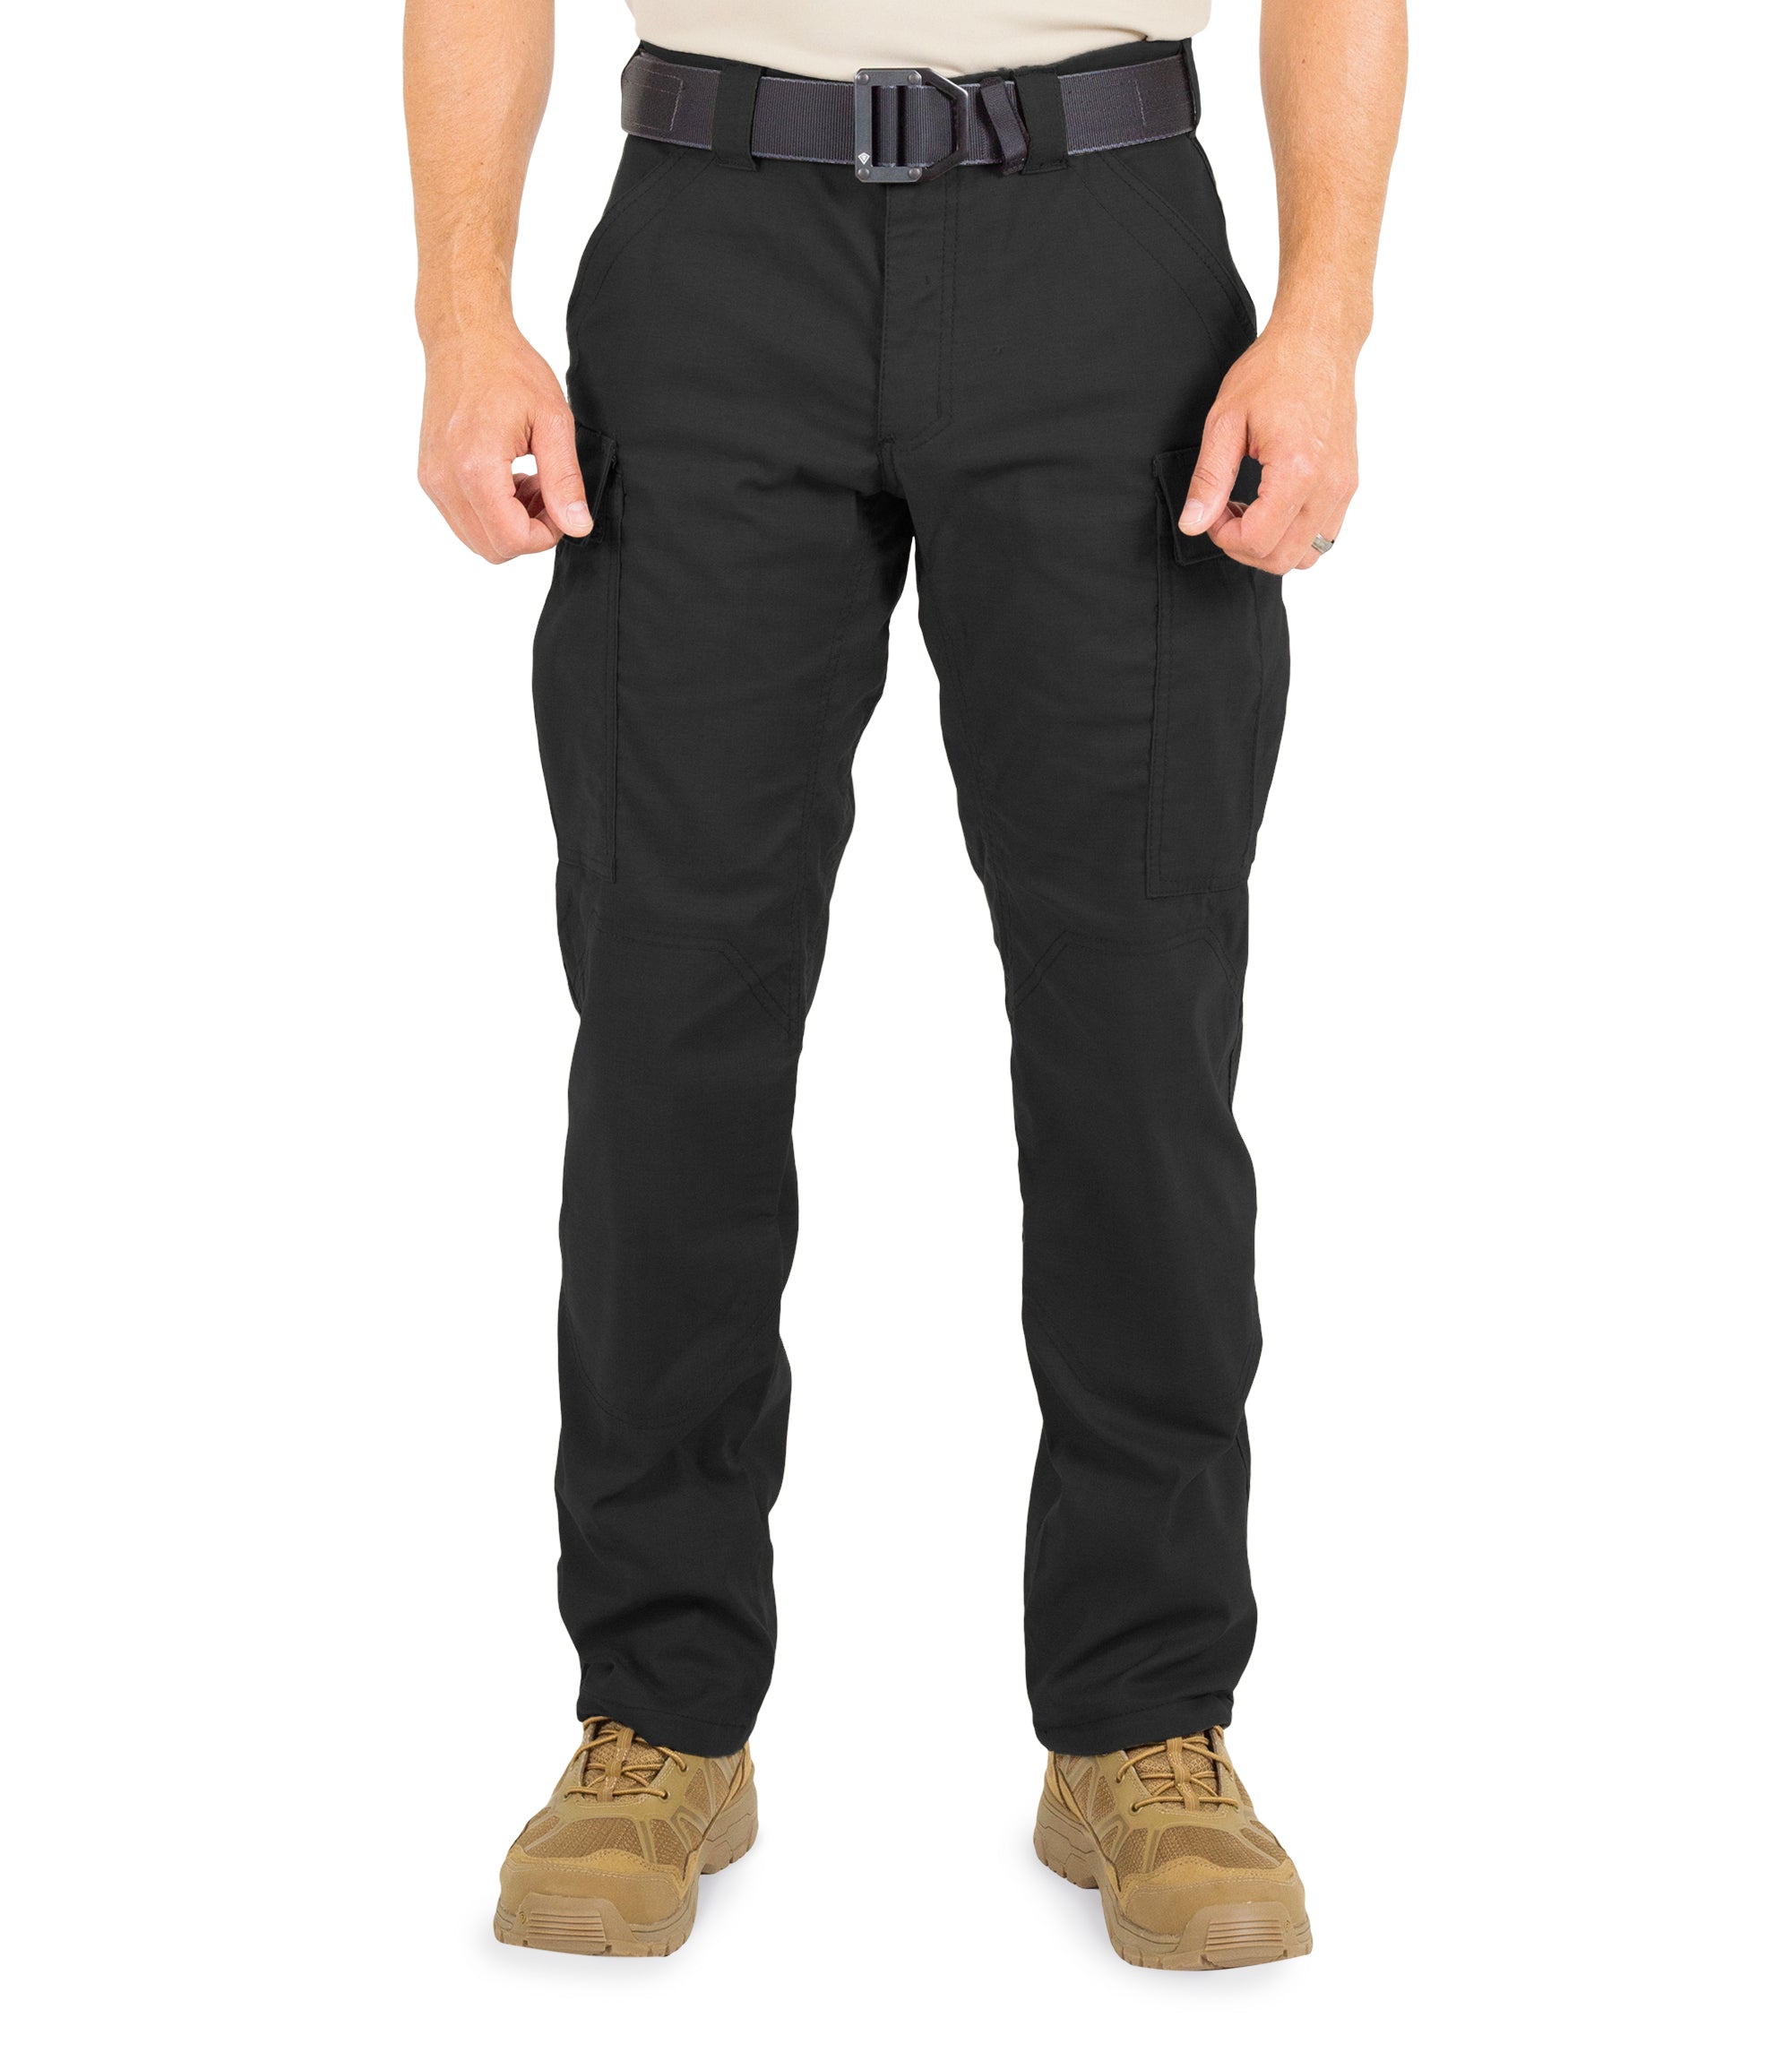 Work Trousers Cargo Pants incl Knee Pads 44-70 Work Trousers Mounting Trousers Waist Trousers 